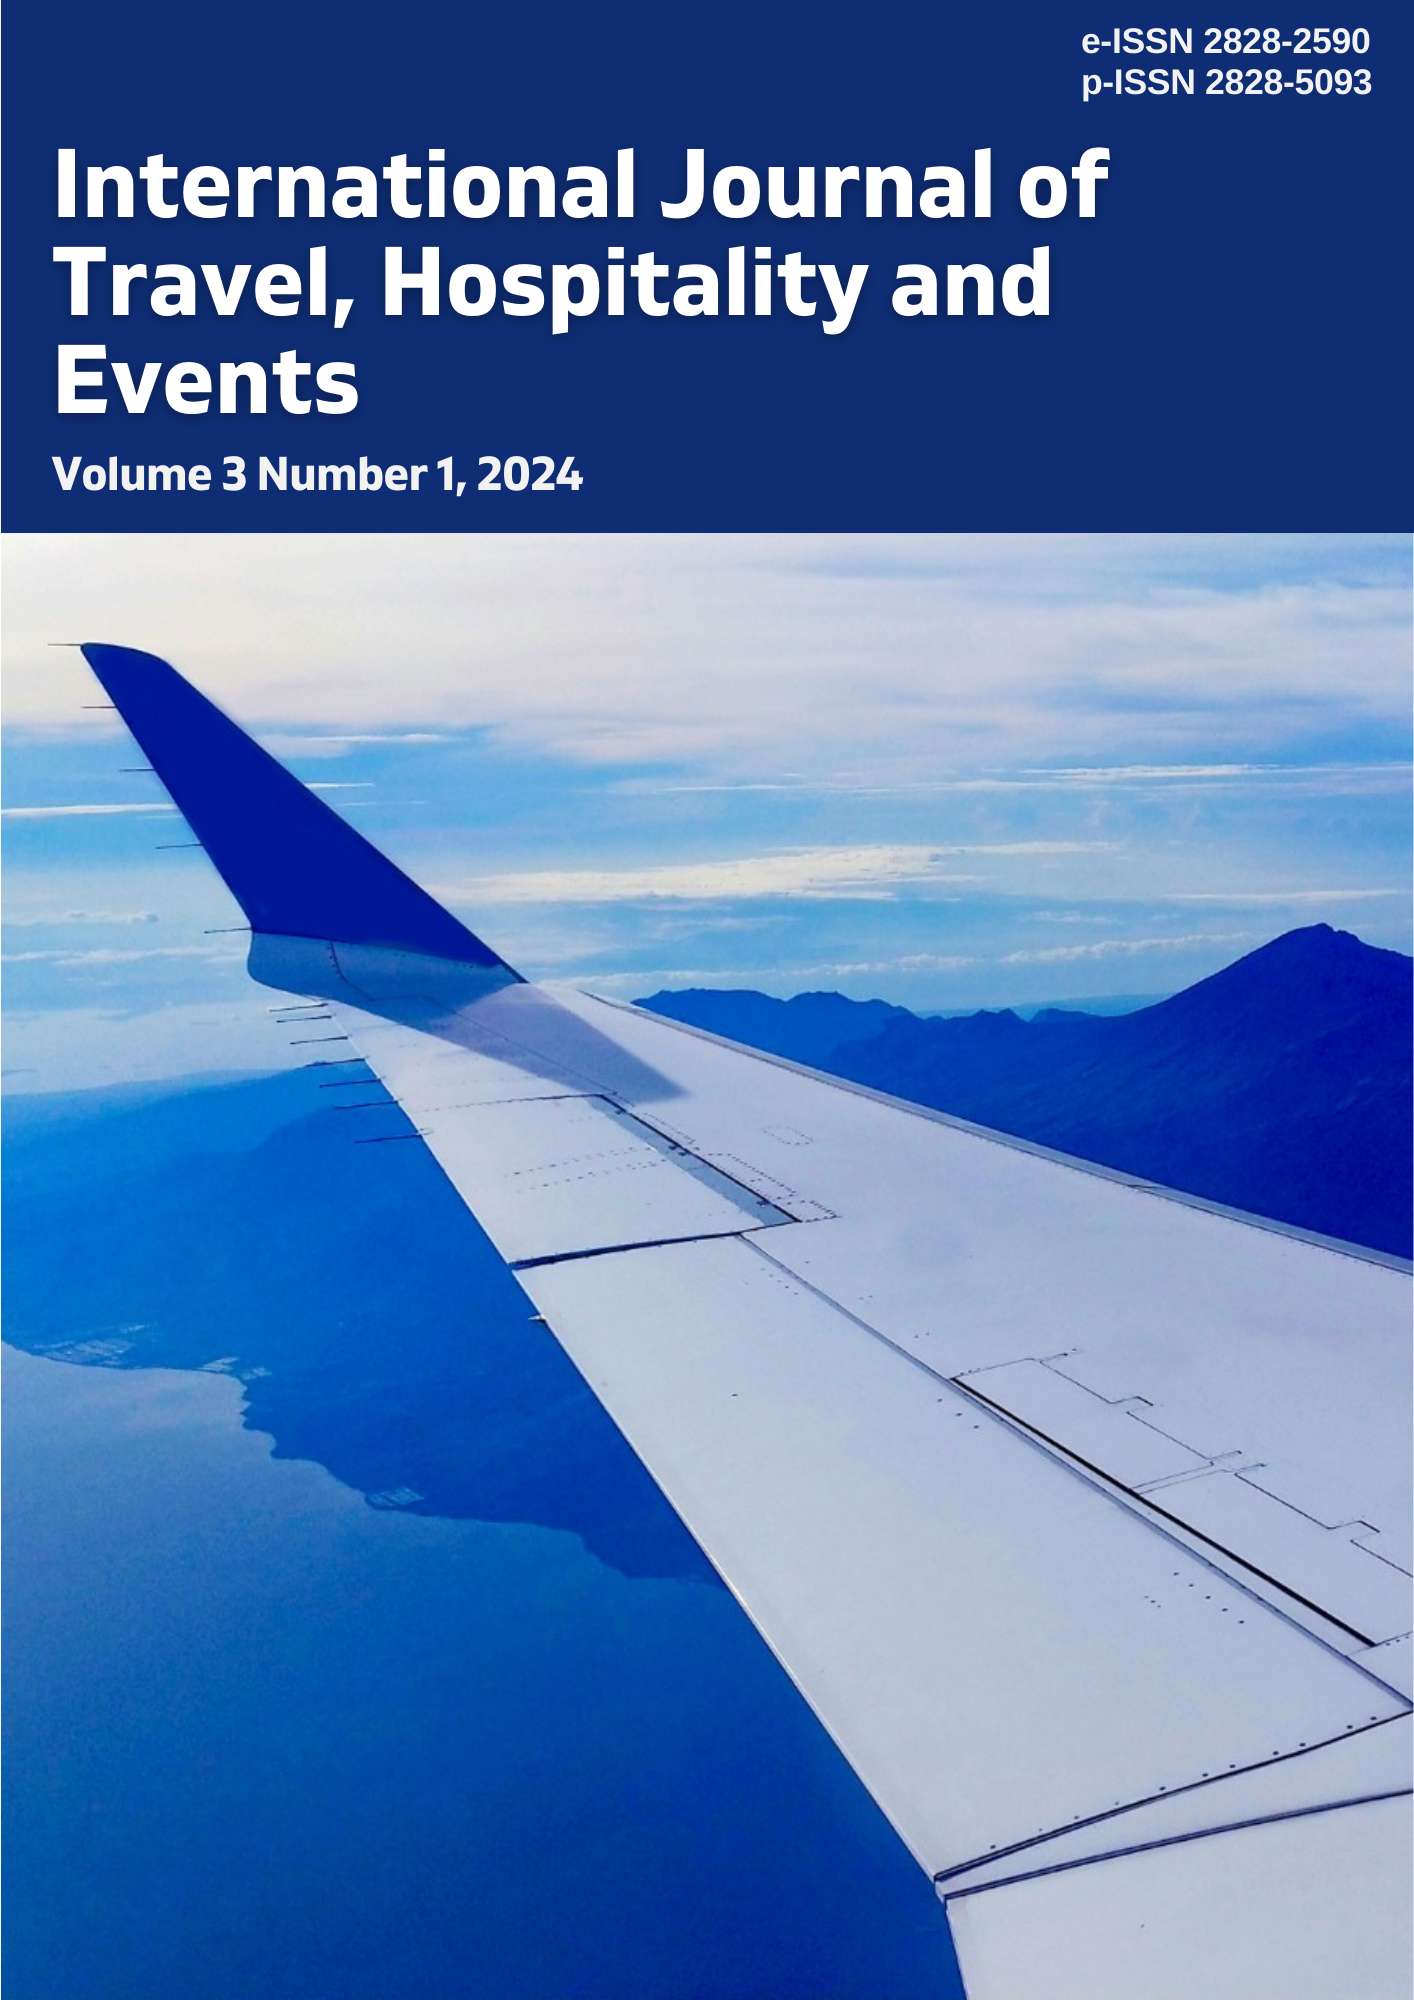 					View Vol. 3 No. 1 (2024): International Journal of Travel, Hospitality and Events
				